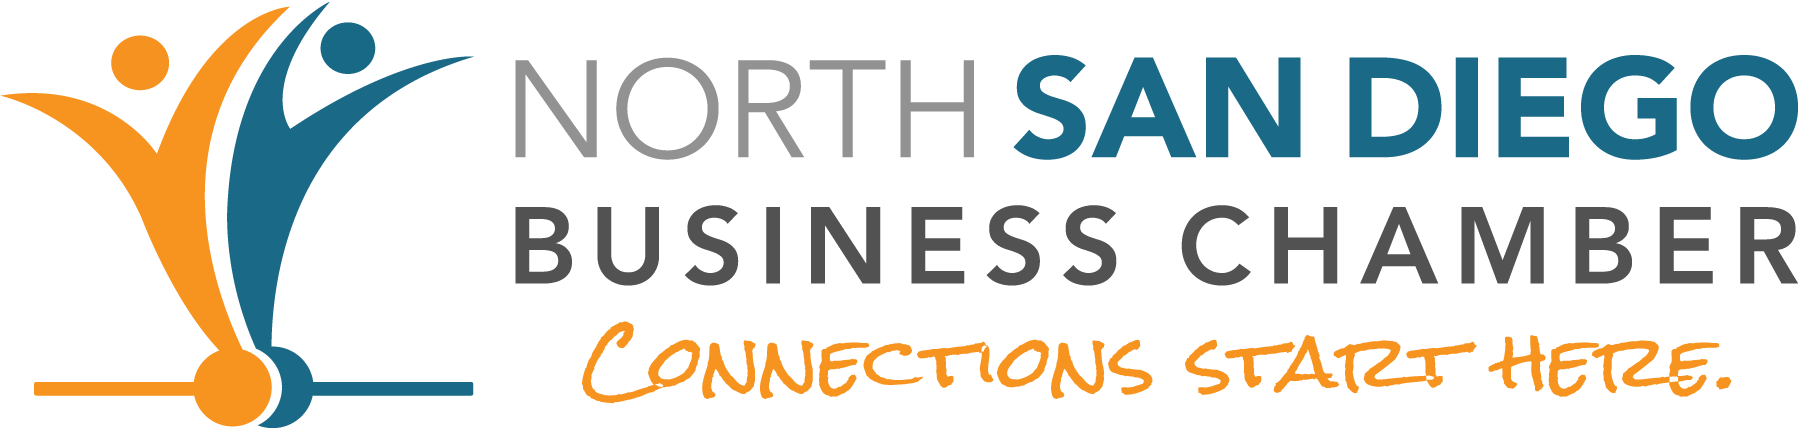 Logo for the North San Diego Business Chamber